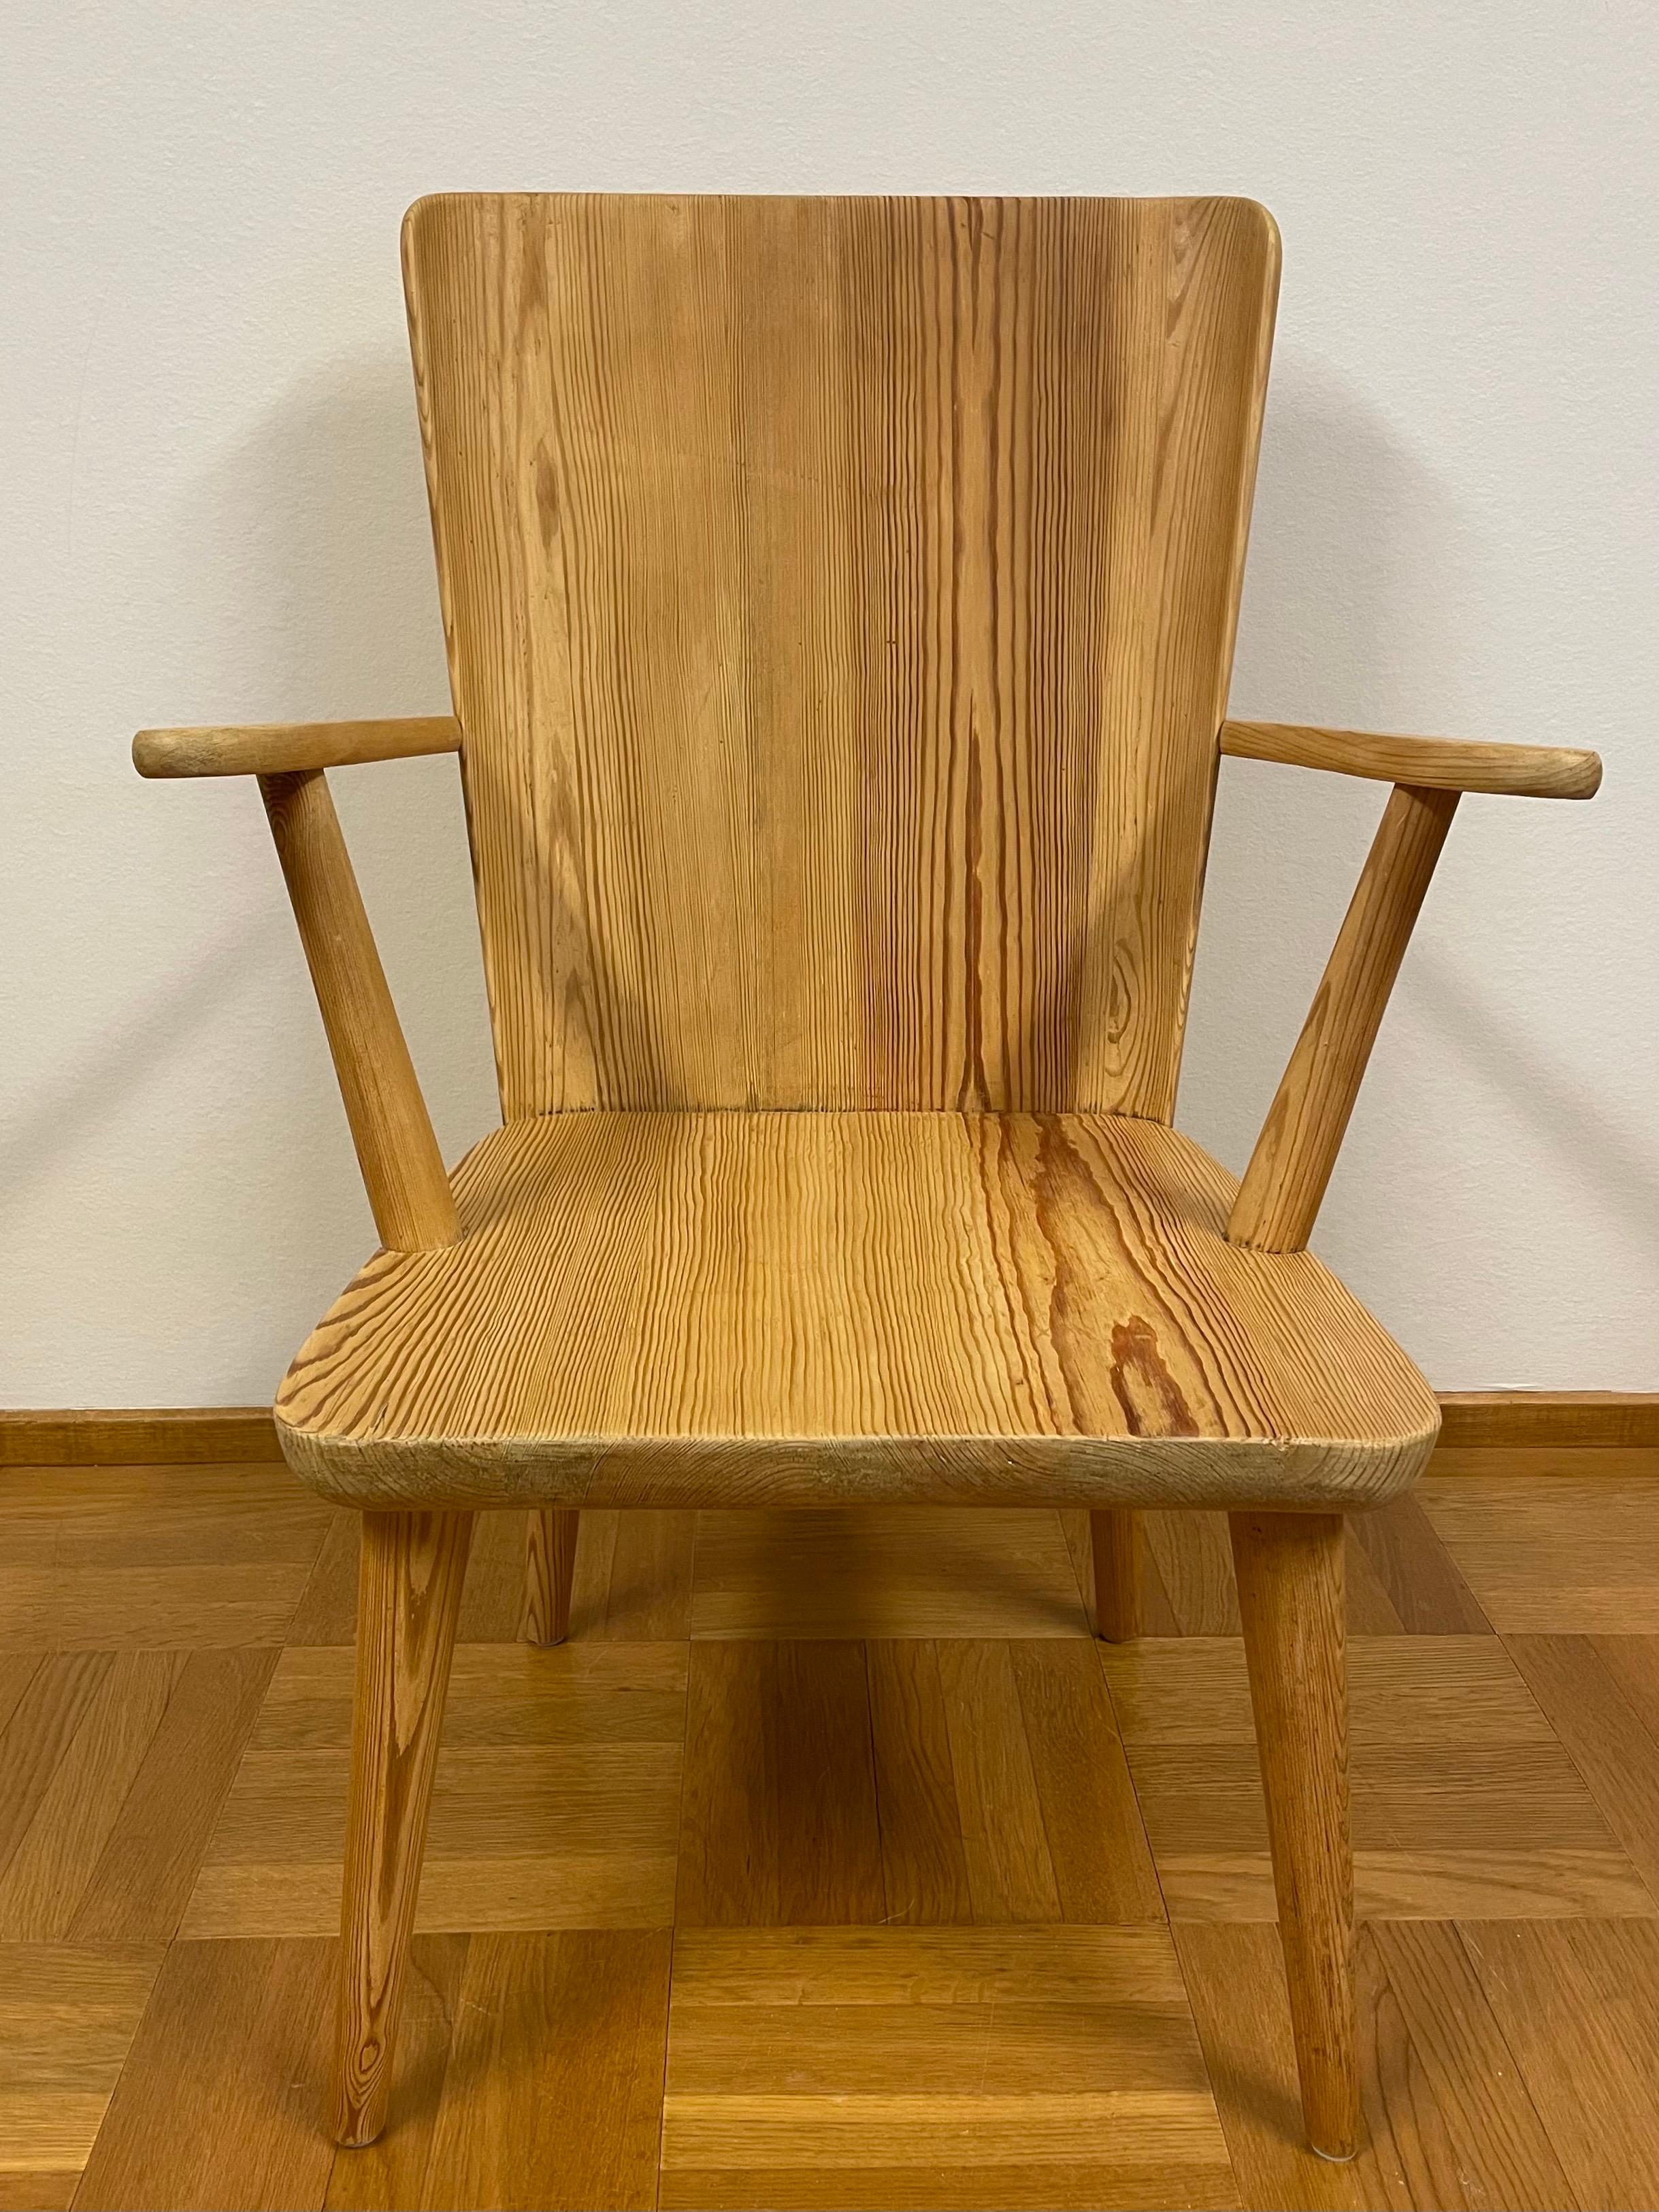 This is the Swedish pine armchair designed by Göran Malmvall for his own furniture company Karl Andersson & Söner. 
Probably an early copy from the 1940s. 
A beautiful patinated solid pine armchair with a high back with slightly curved sides. 

This